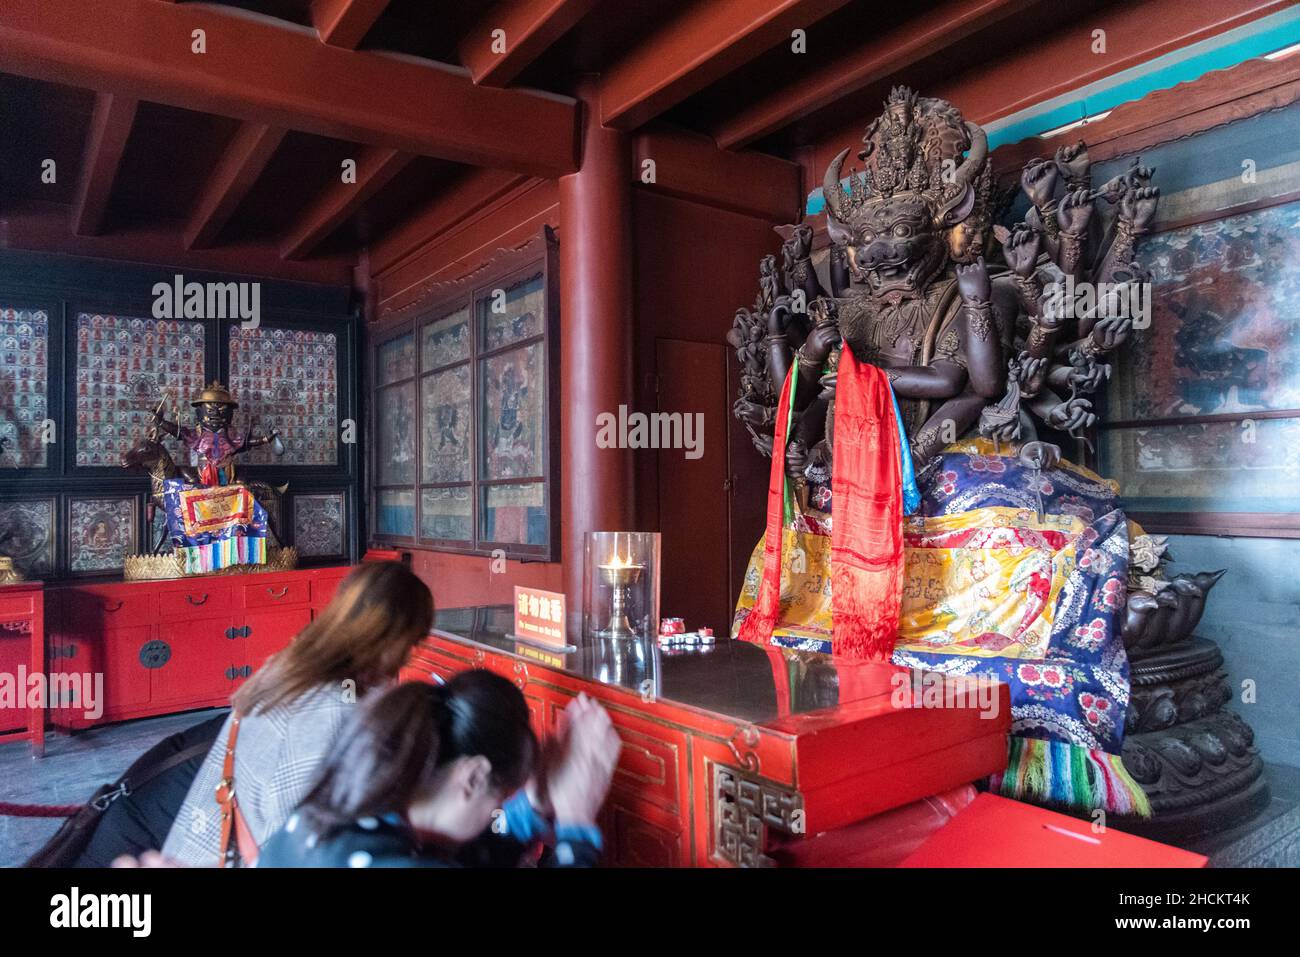 Beijing, 24/02/2019. The spiritual landmark of the capital: Yonghe Gong, also known as the Lama Temple Stock Photo